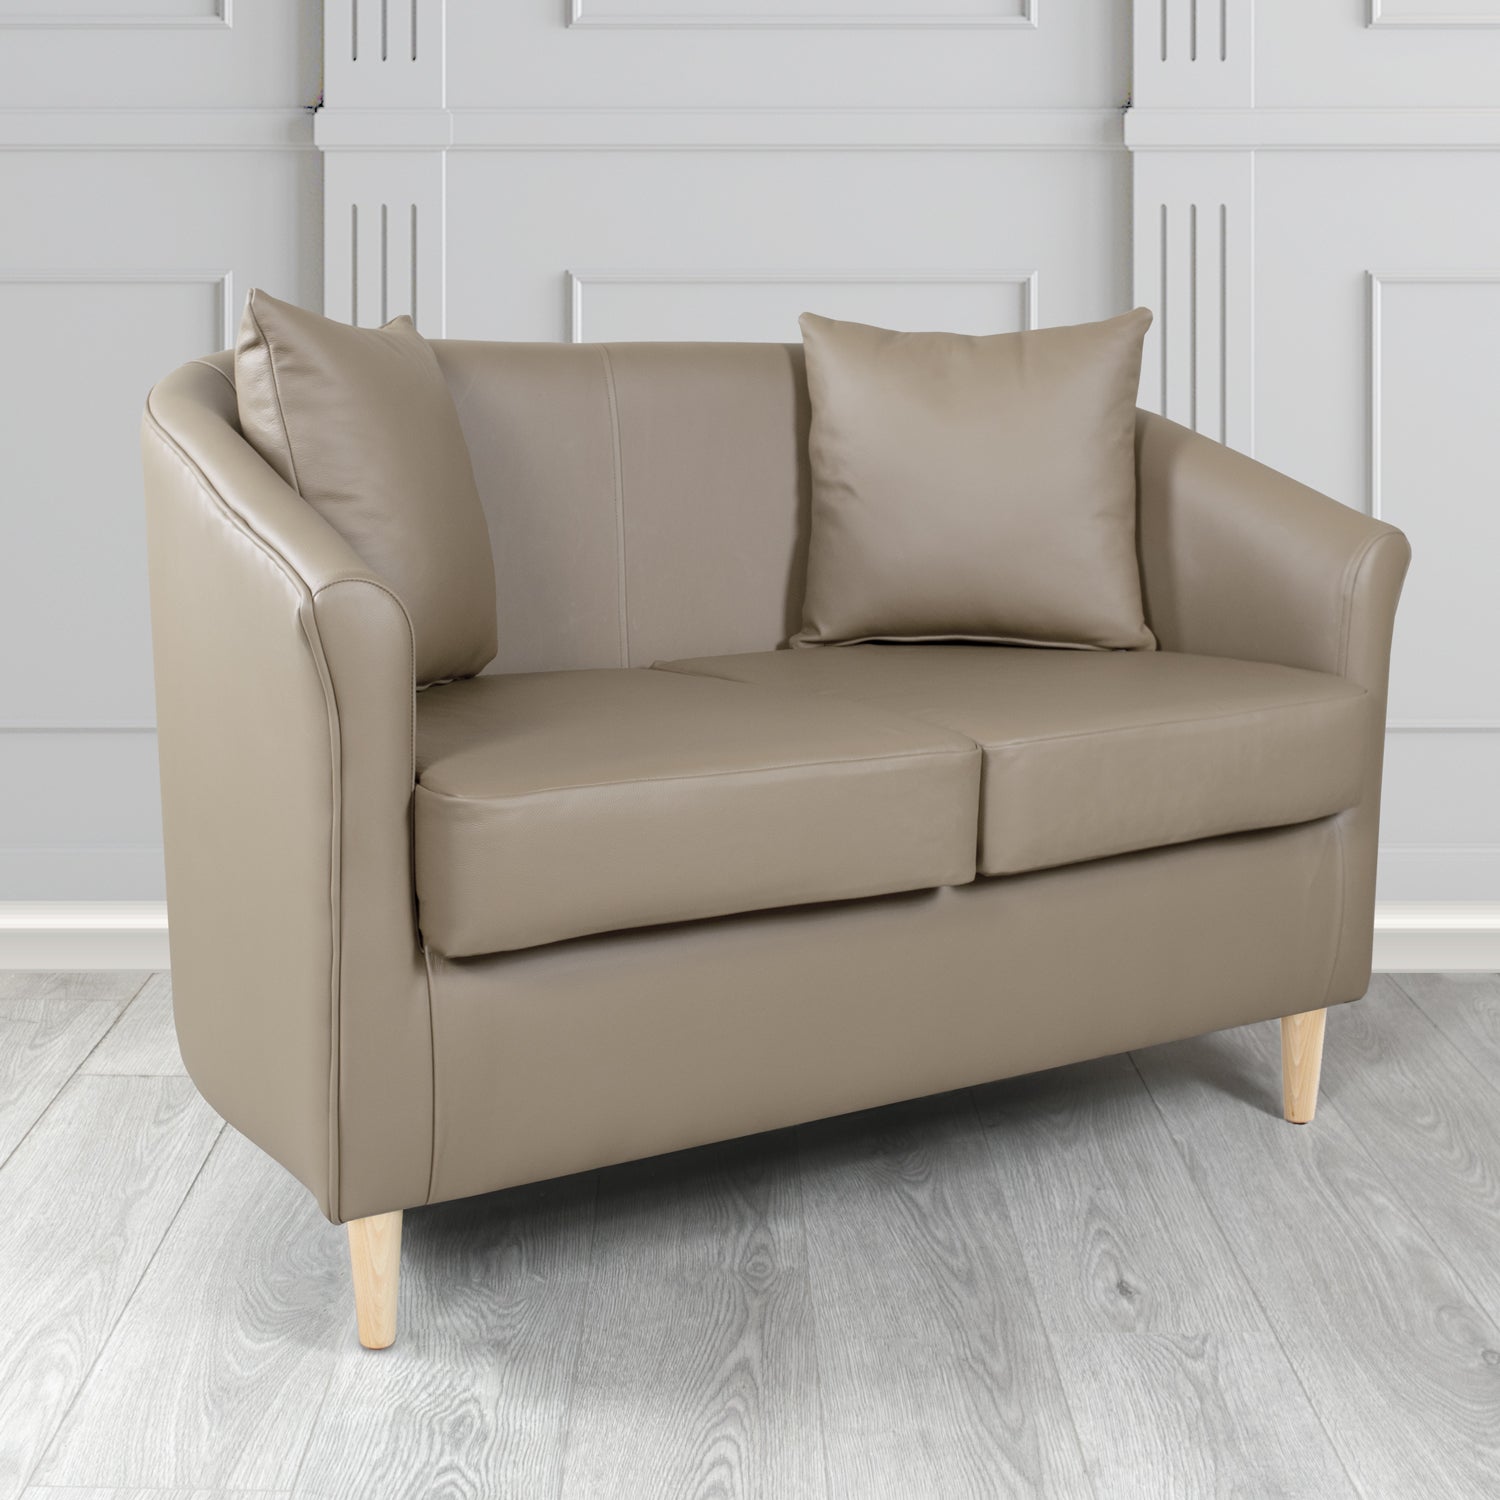 St Tropez Shelly Silver Birch Crib 5 Genuine Leather 2 Seater Tub Sofa with Scatter Cushions - The Tub Chair Shop